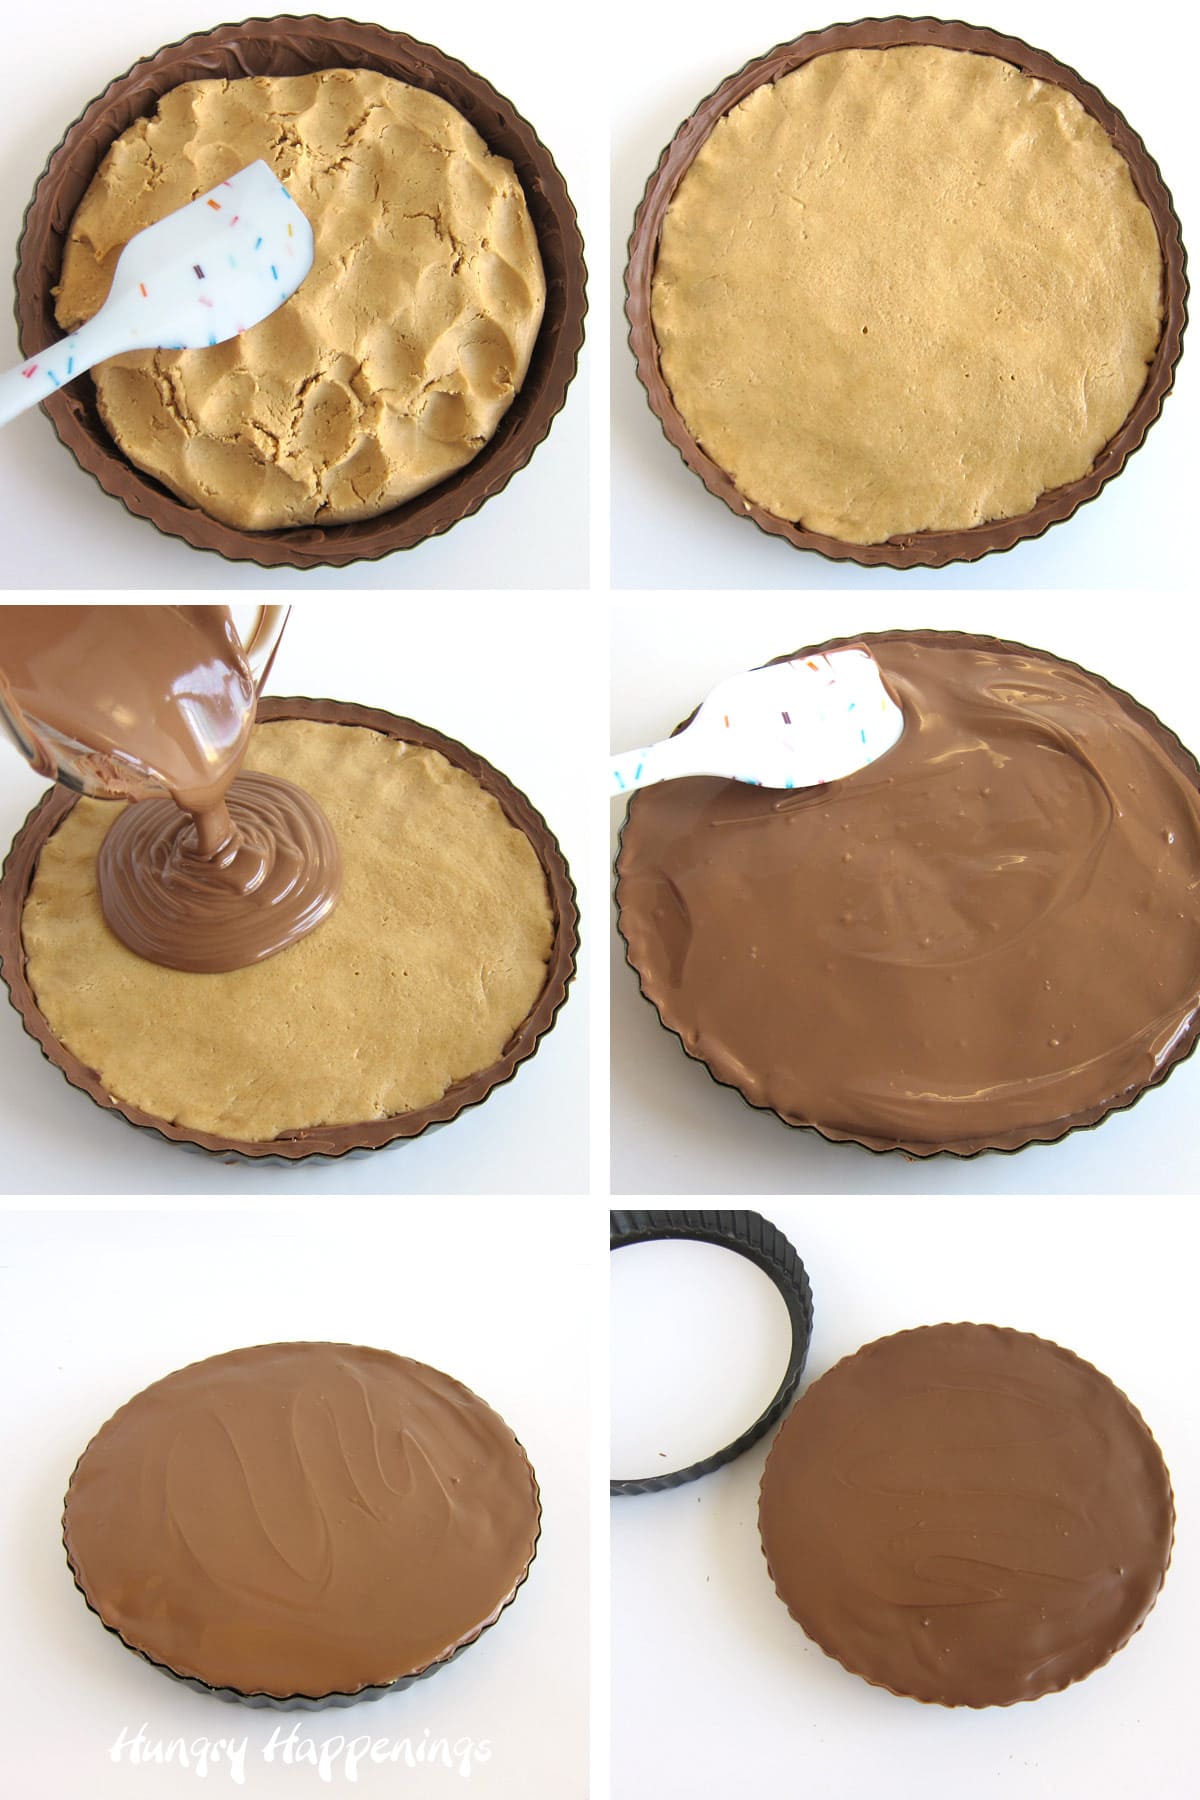 Spread peanut butter fudge into the chocolate shell then spread more chocolate over the top.